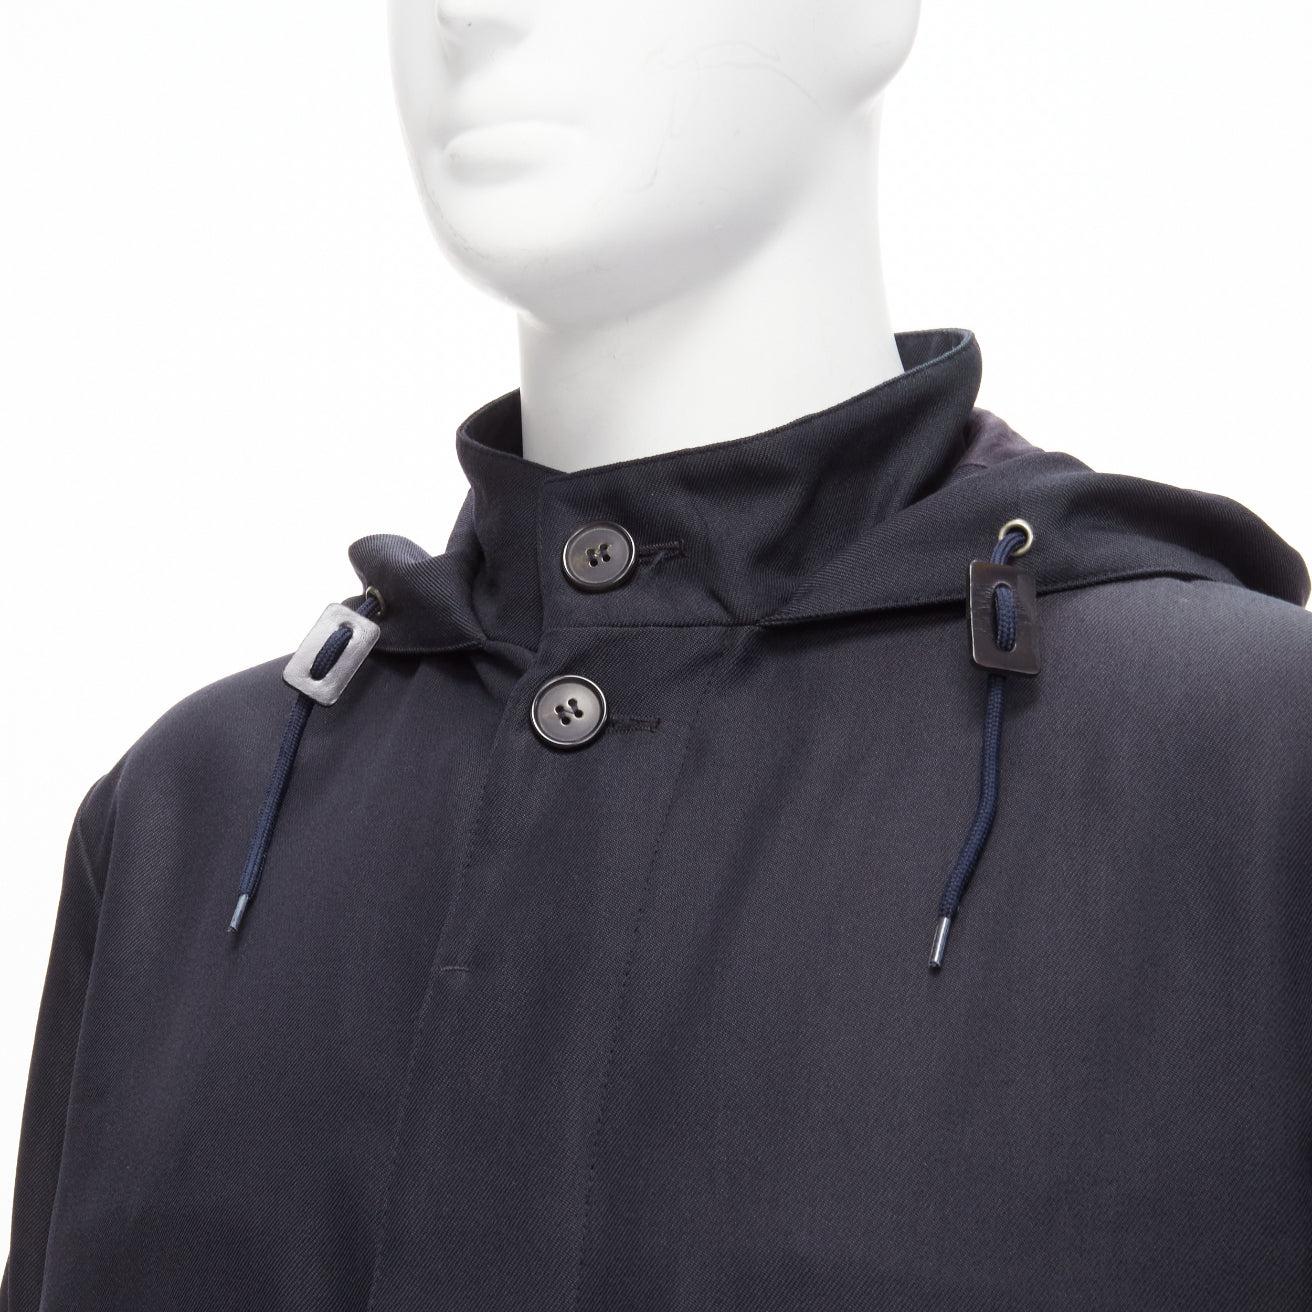 MARNI black wool blend leather stopper hooded concealed buttons parka jacket IT48 M
Reference: YNWG/A00188
Brand: Marni
Material: Wool, Blend
Color: Black
Pattern: Solid
Closure: Button
Lining: Black Cotton
Extra Details: Invisible button stand.